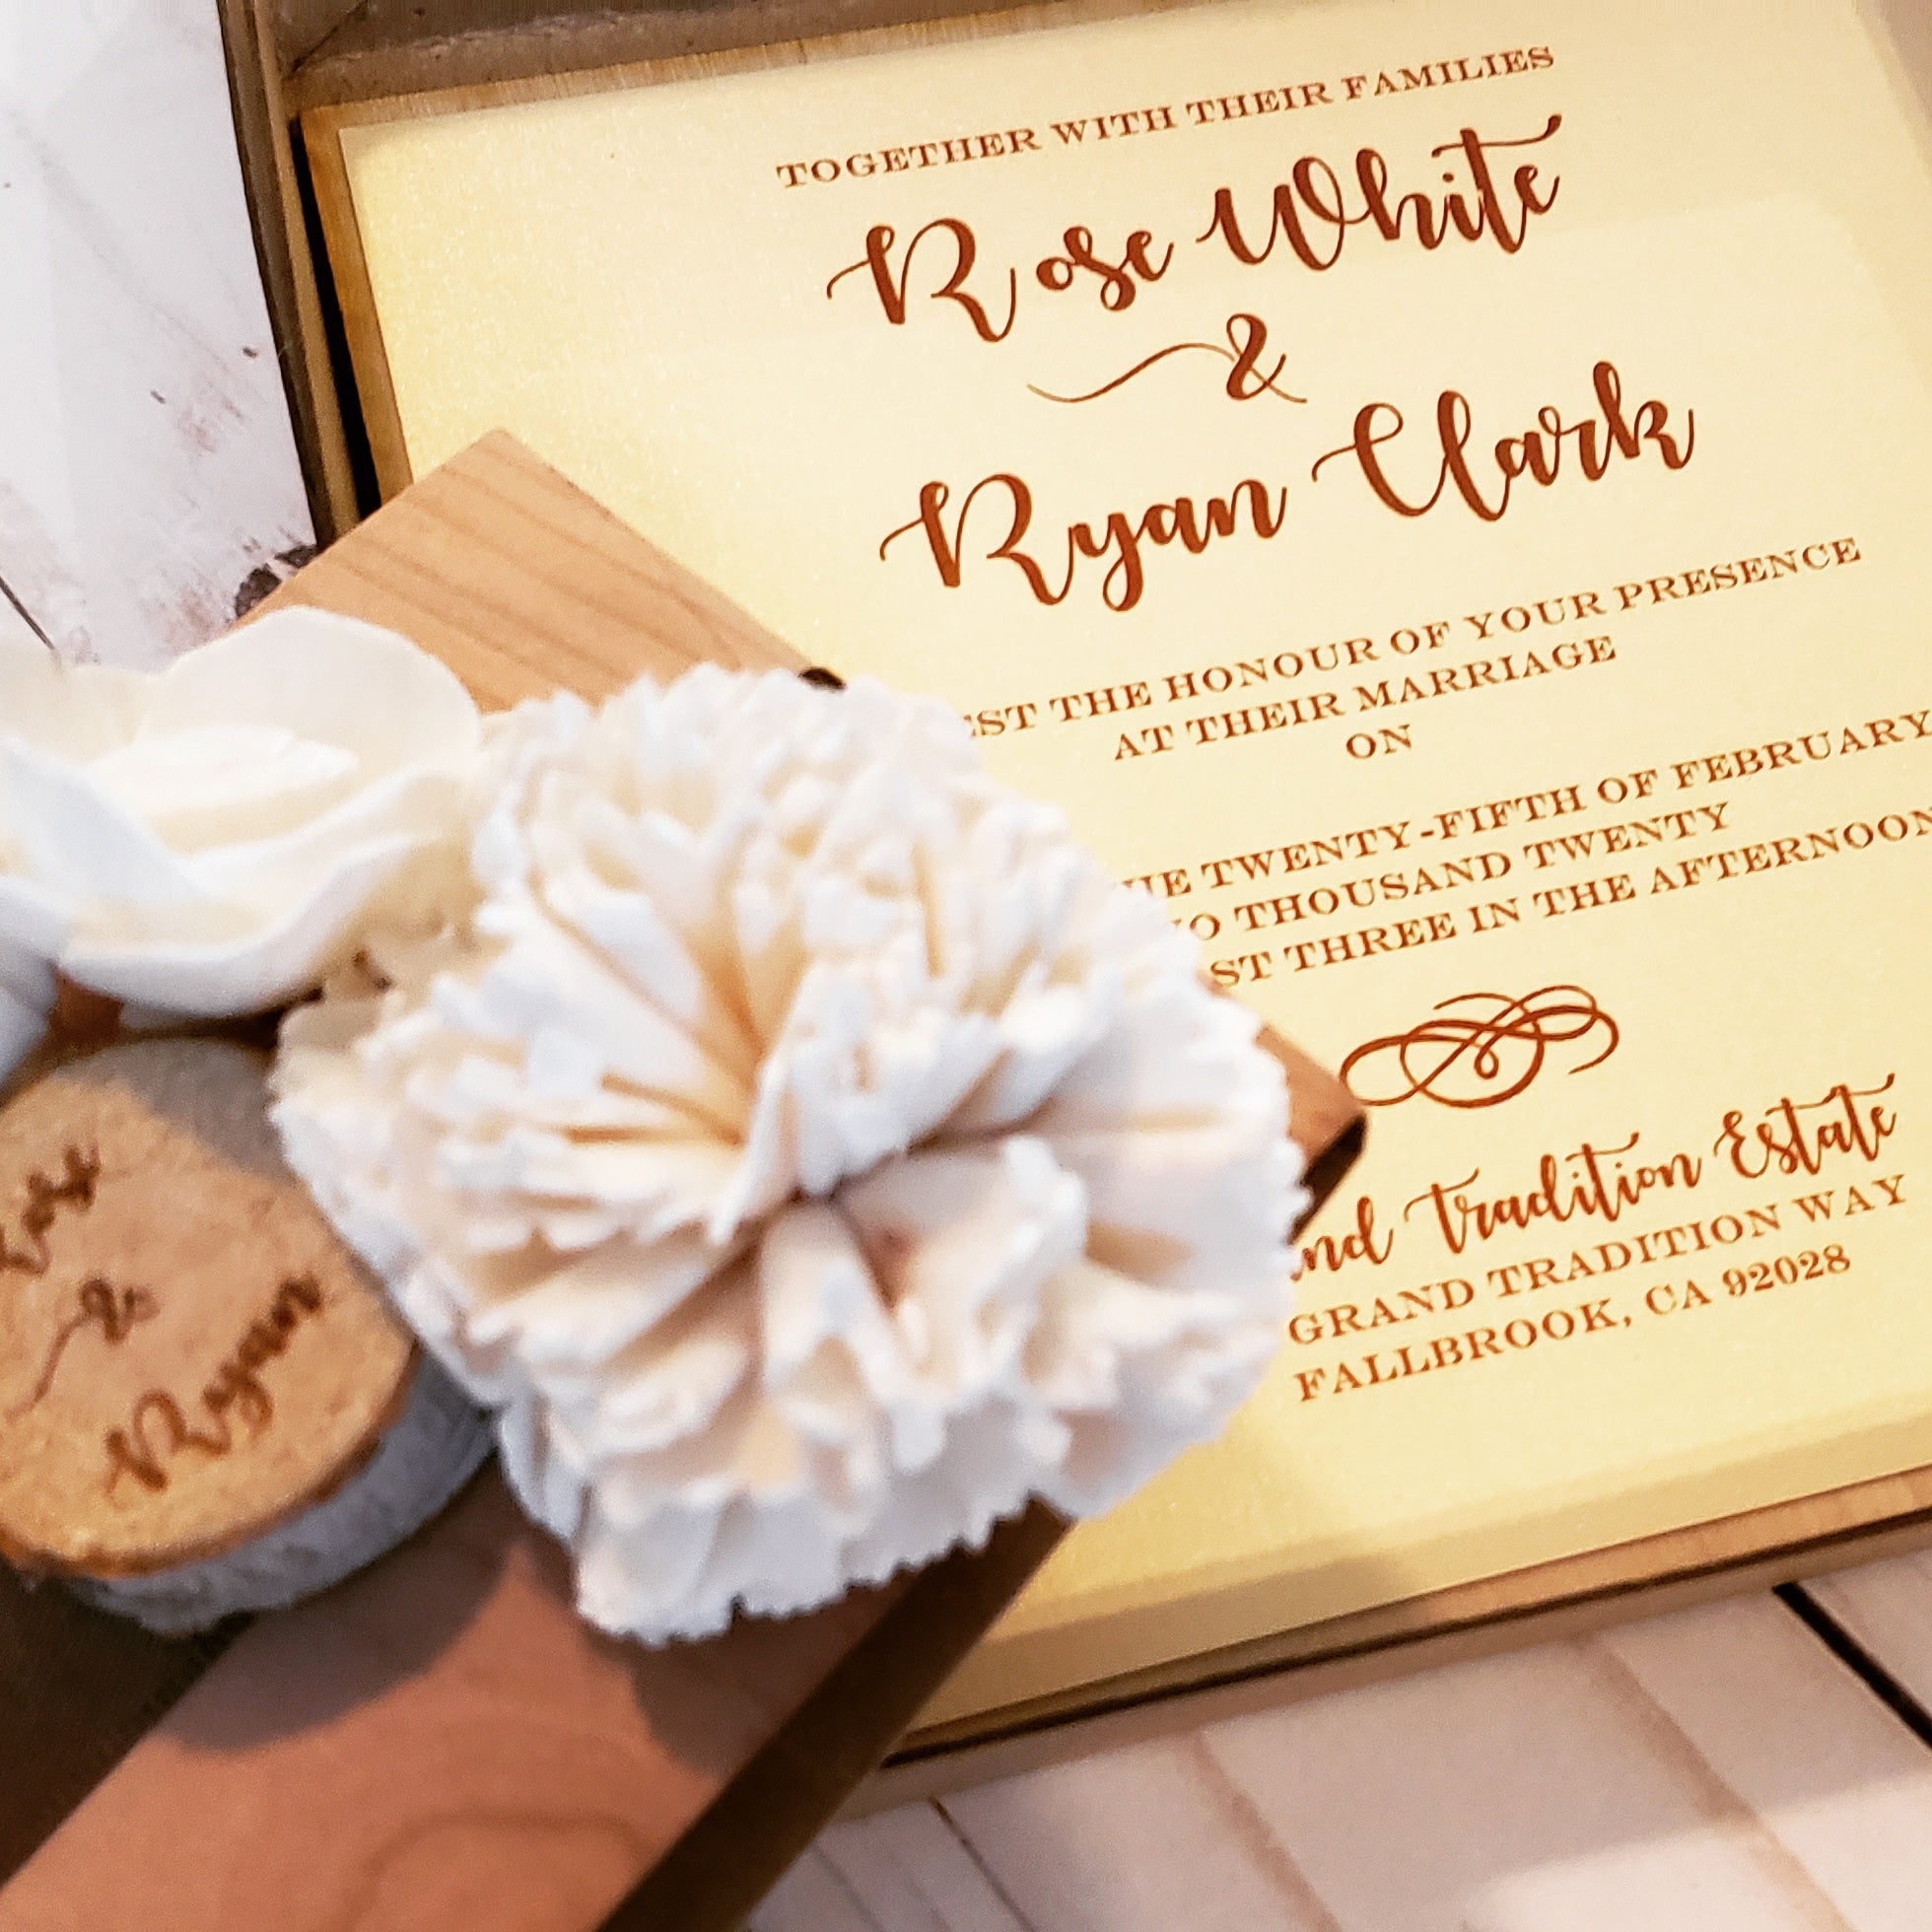 Sola Flower Real Wood Vintage Rustic Boxed Wedding Invitation with lasered sliced log- NEW and sustainable!